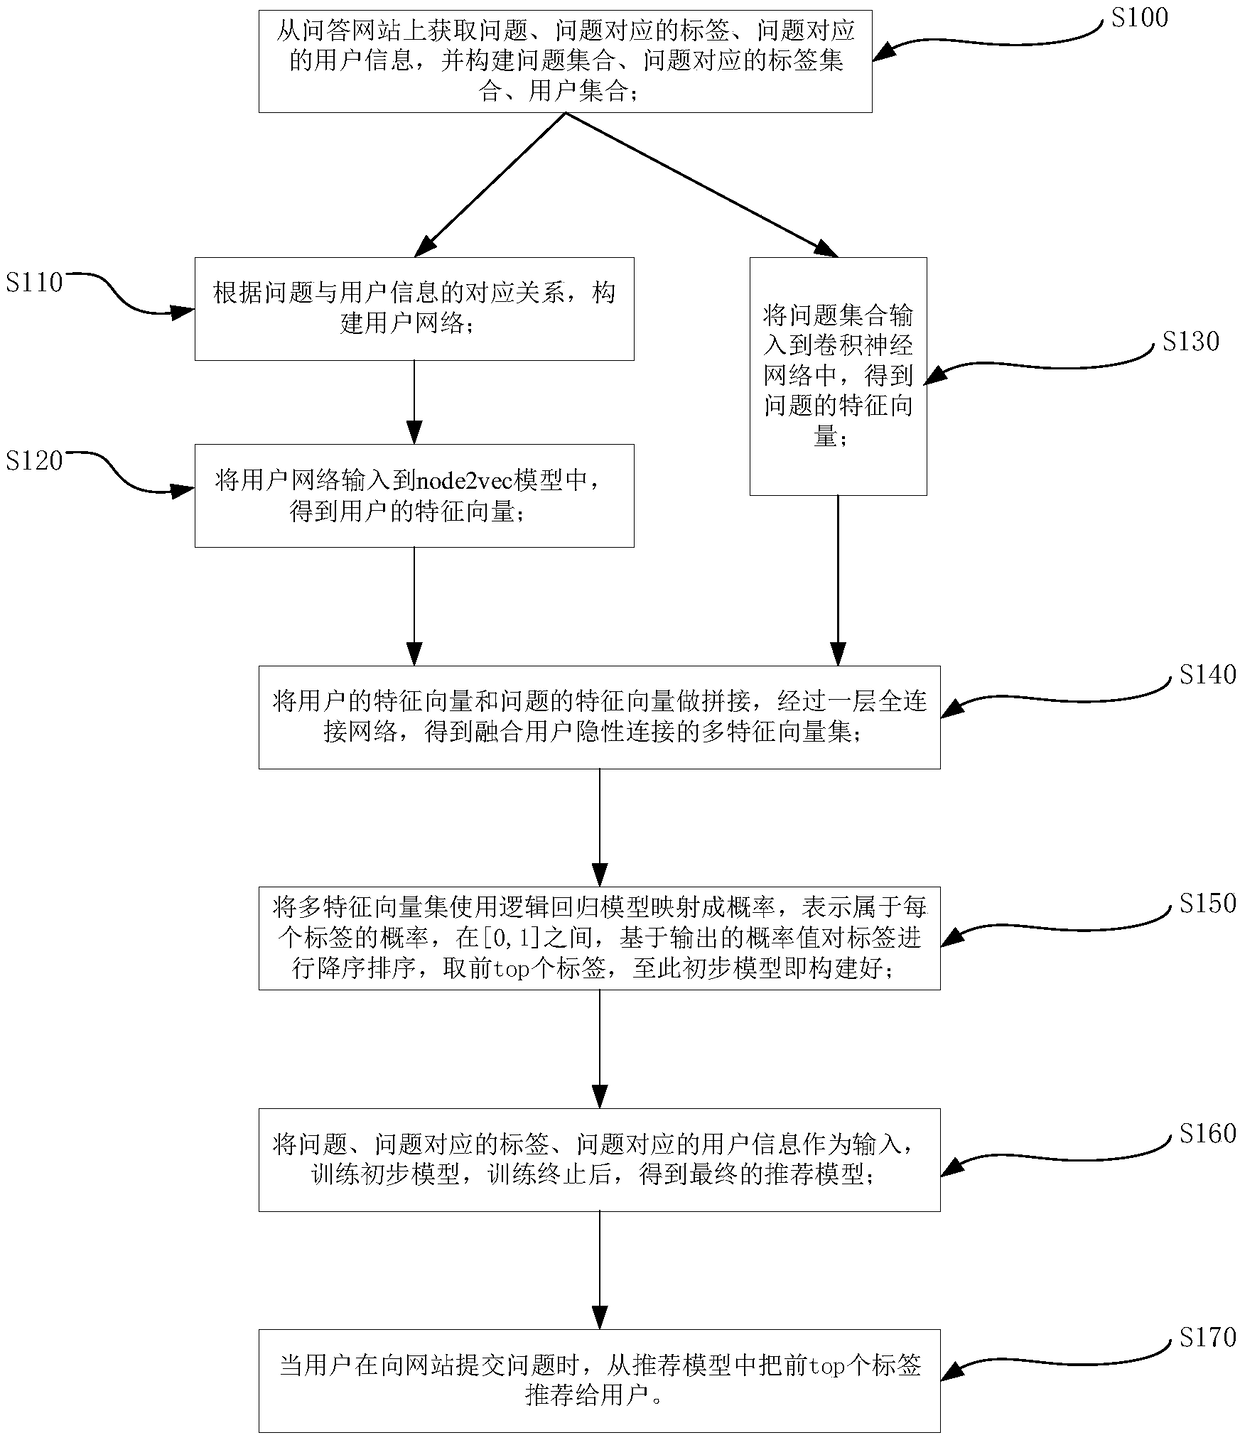 Label recommendation method fused with implicit connection relationship of users and oriented on question and answer platform